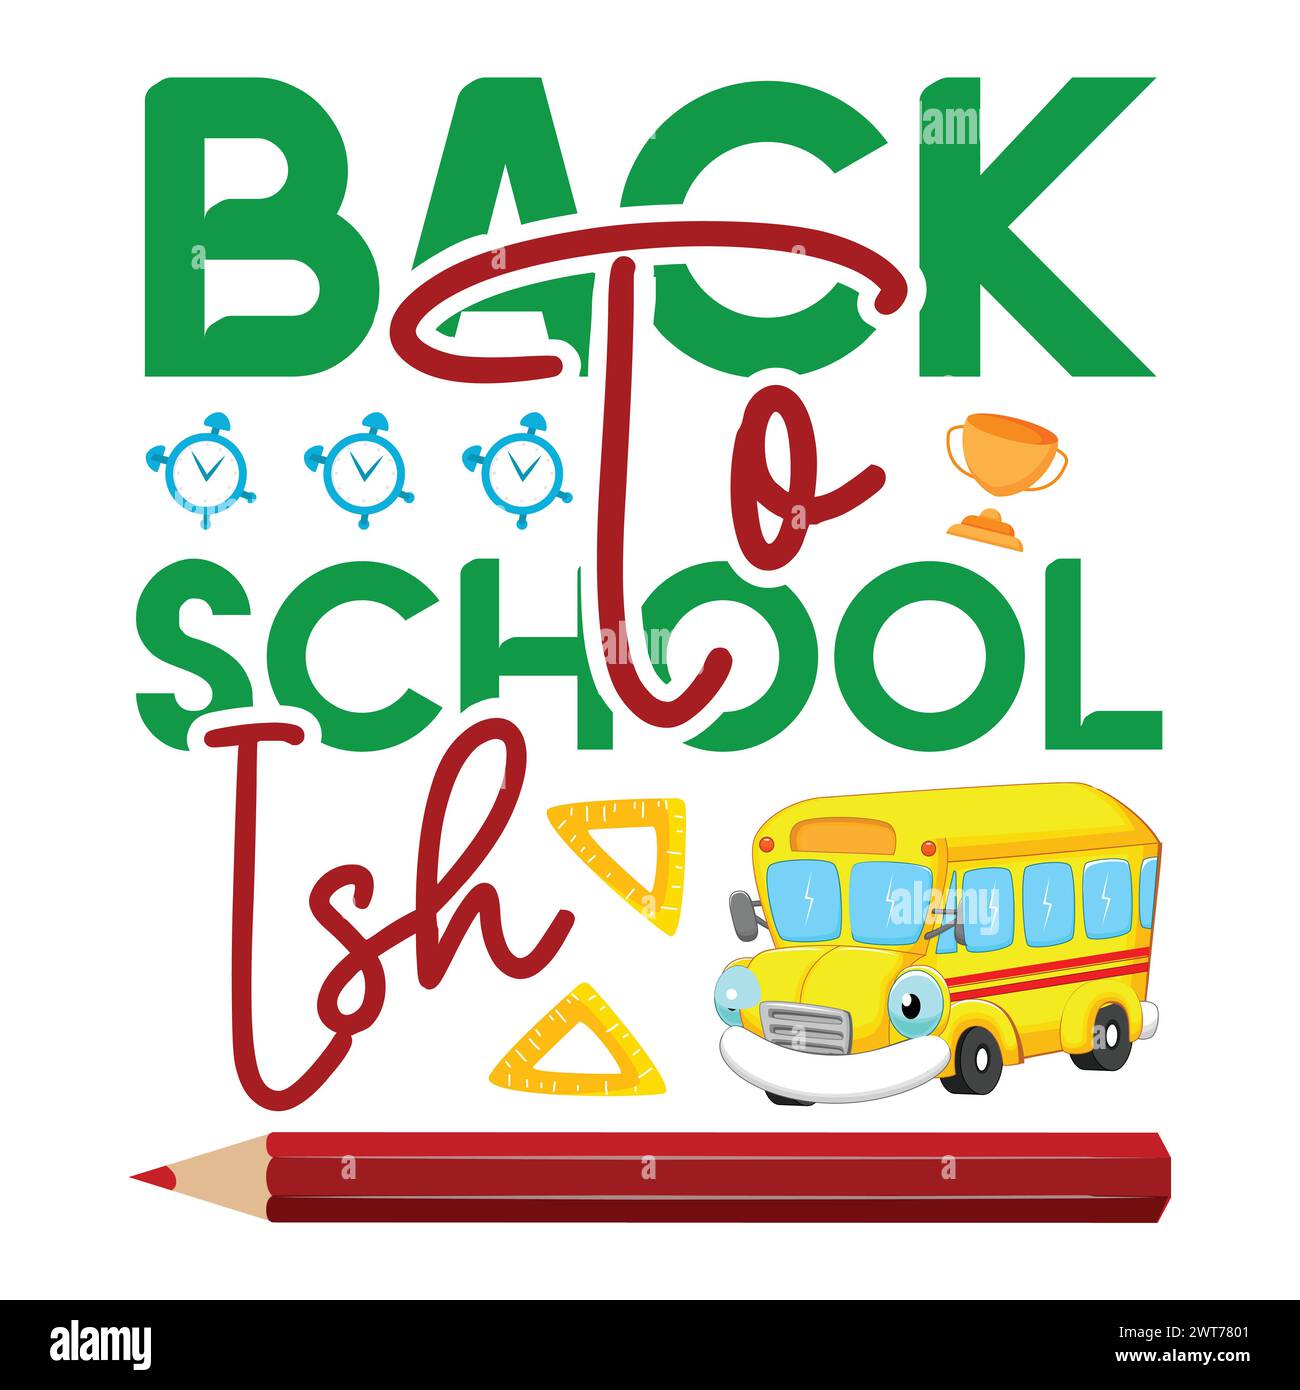 Back To School Shirt Print Template, Typography Design For Shirt, Mugs, Iron, Glass, Stickers, Hoodies, Pillows, Phone Cases, etc Stock Vector